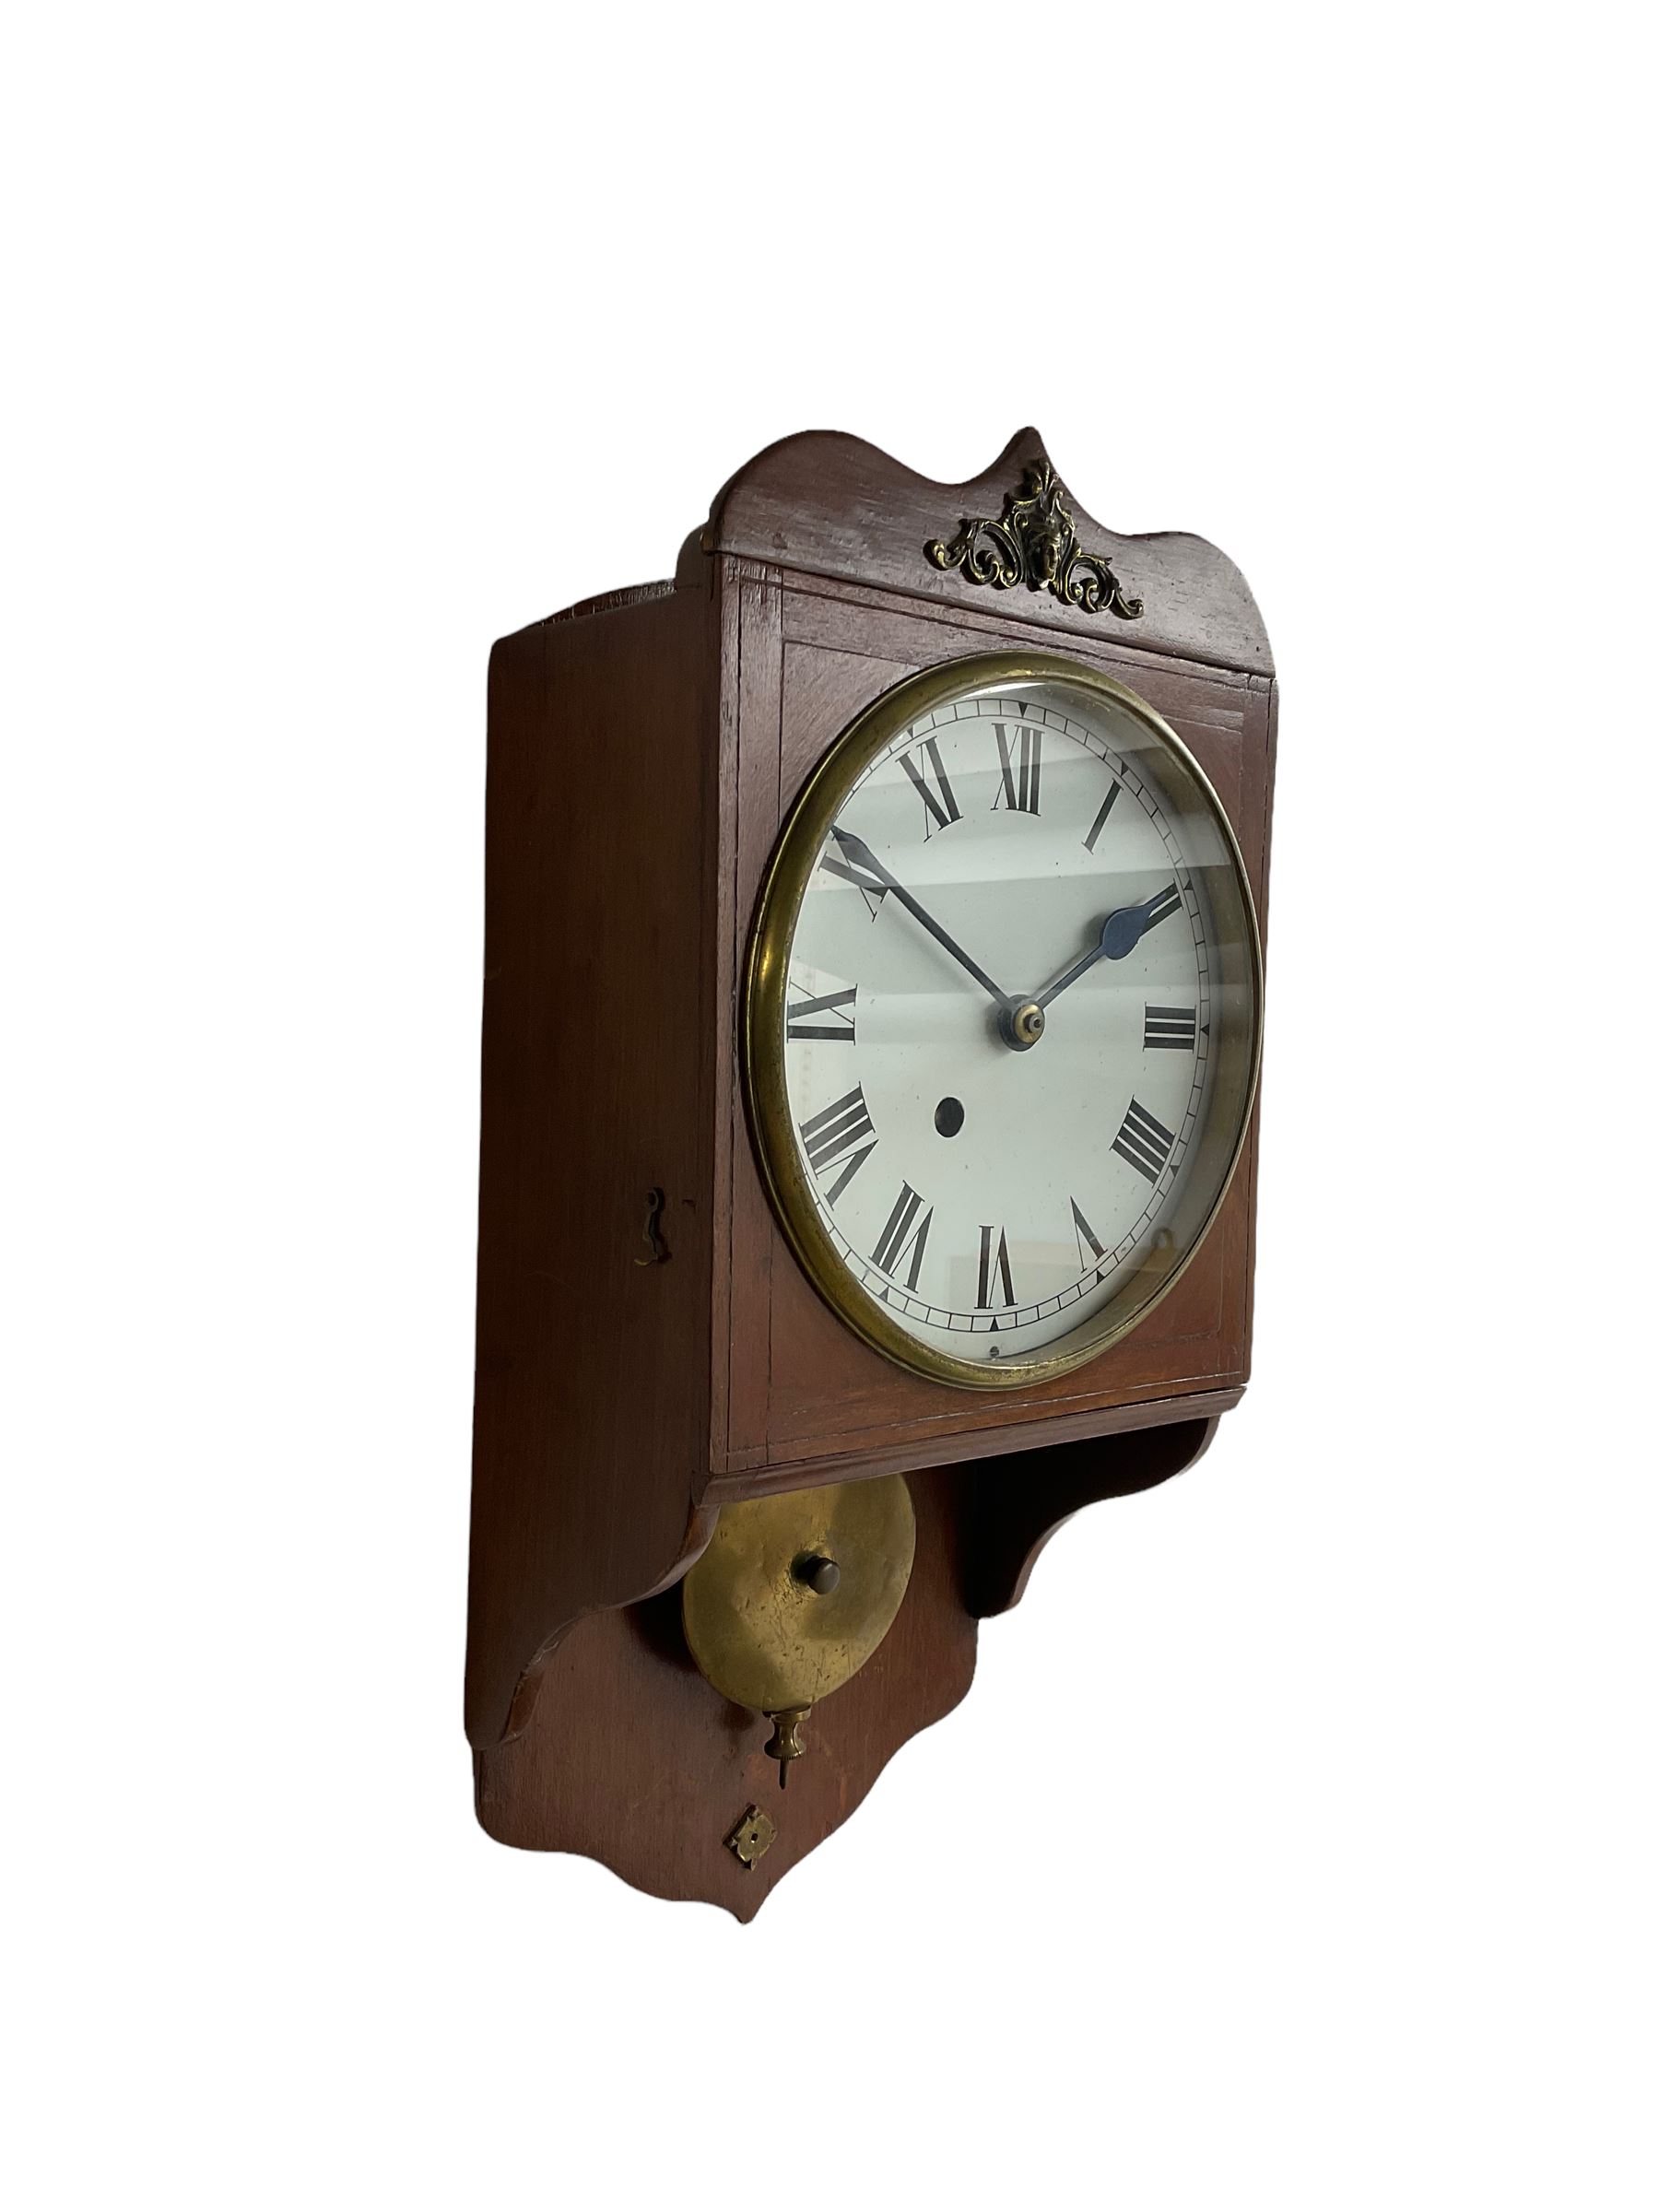 An early 20th century wall clock in a mahogany case - Image 2 of 4